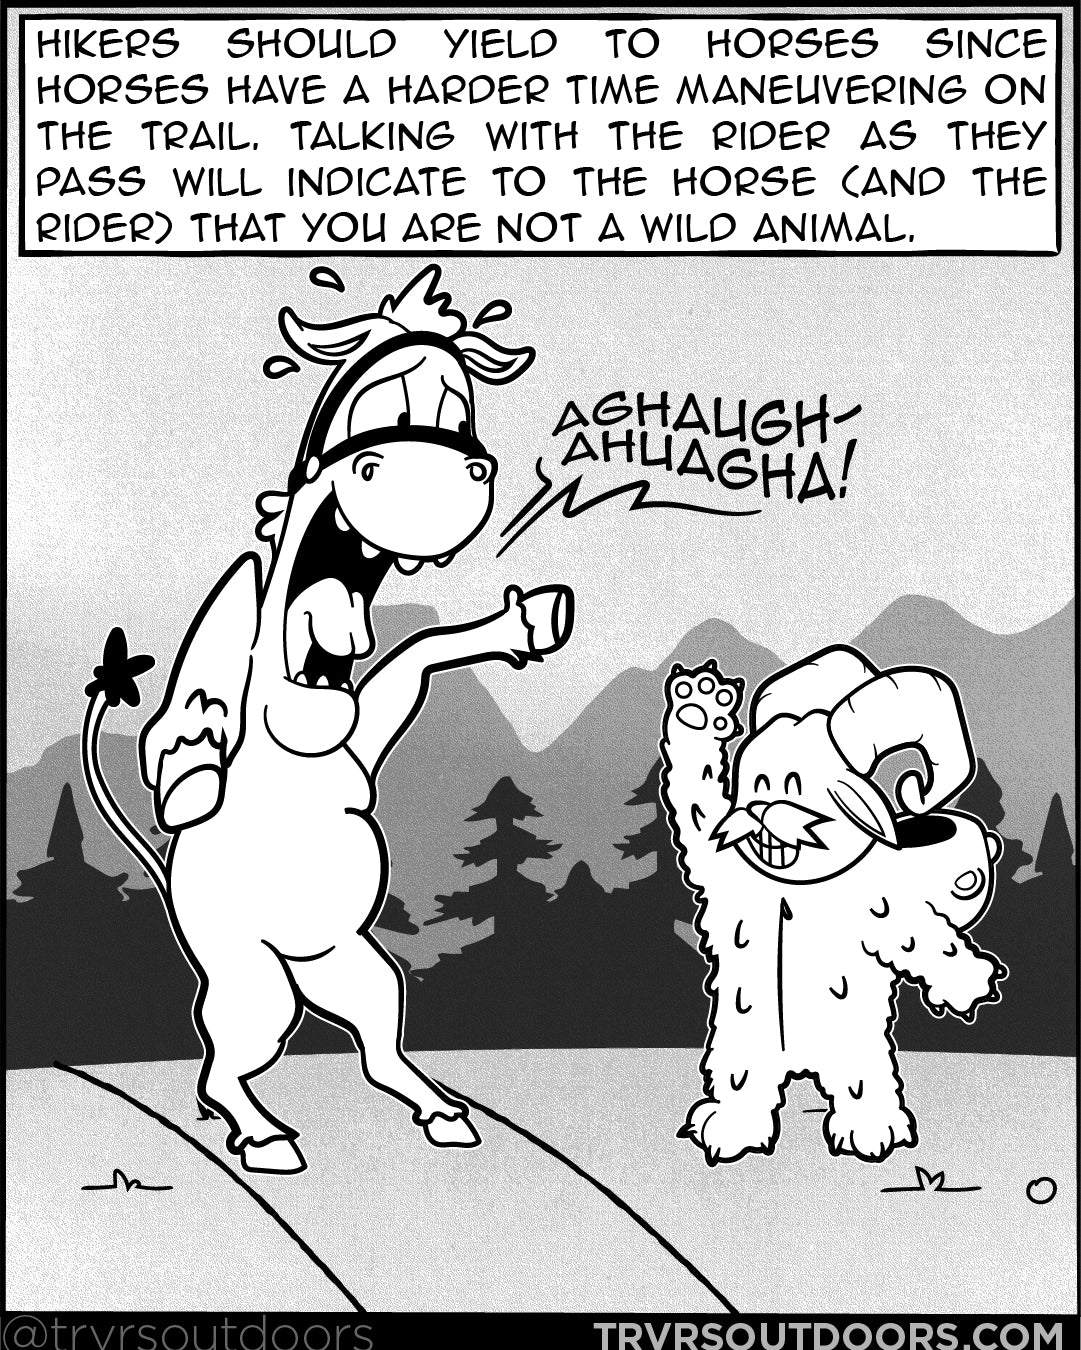 All Trail Users Must Yield To Horses (and other animals) - The Right (Of) Way featuring Lambert, The Adventures Of Lambert Comic Series | TRVRS Outdoors